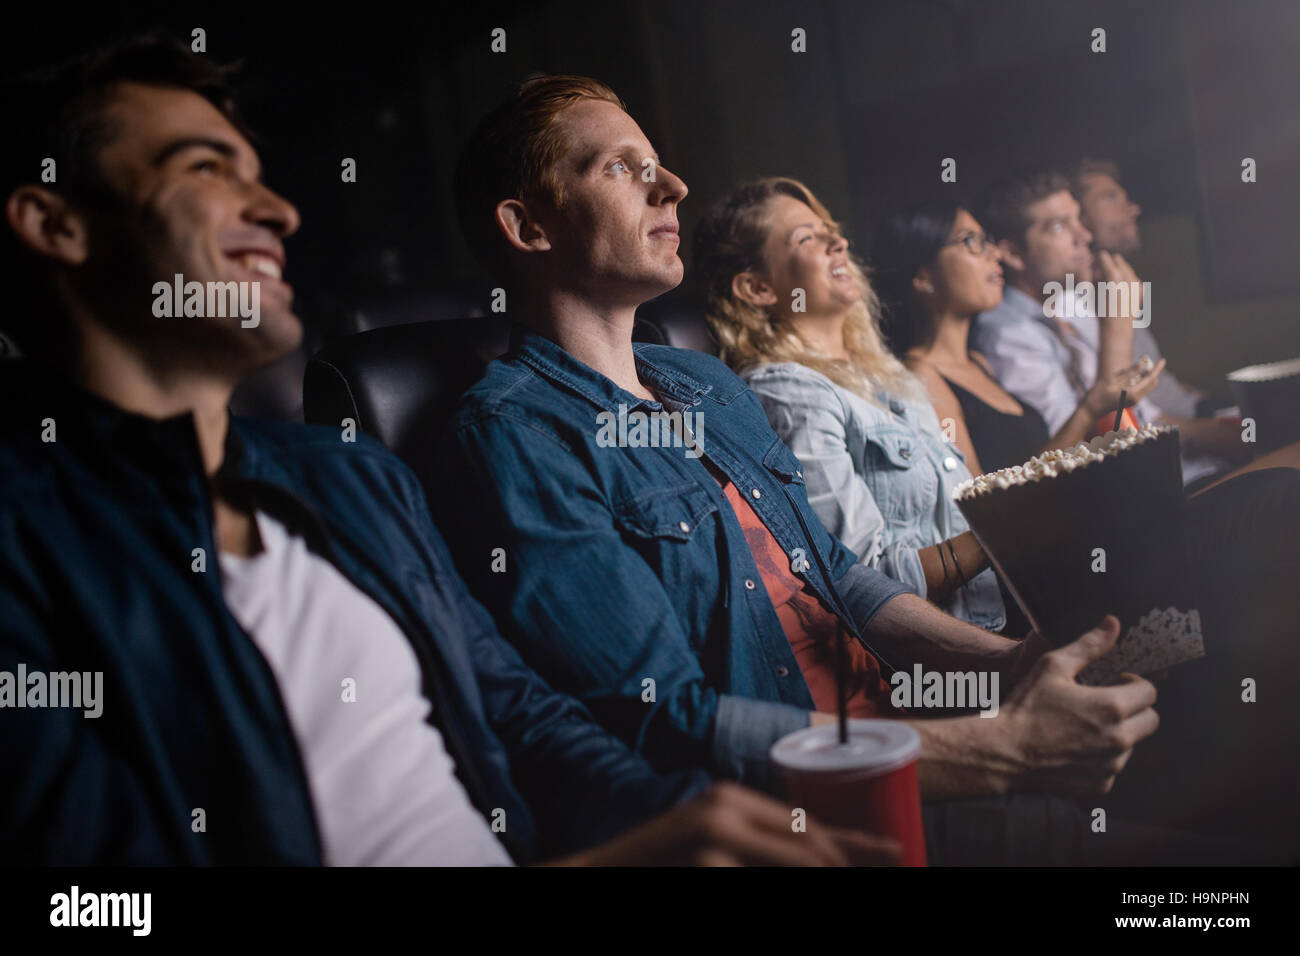 Group of people in theater watching movie. Young man with friends in cinema. Stock Photo